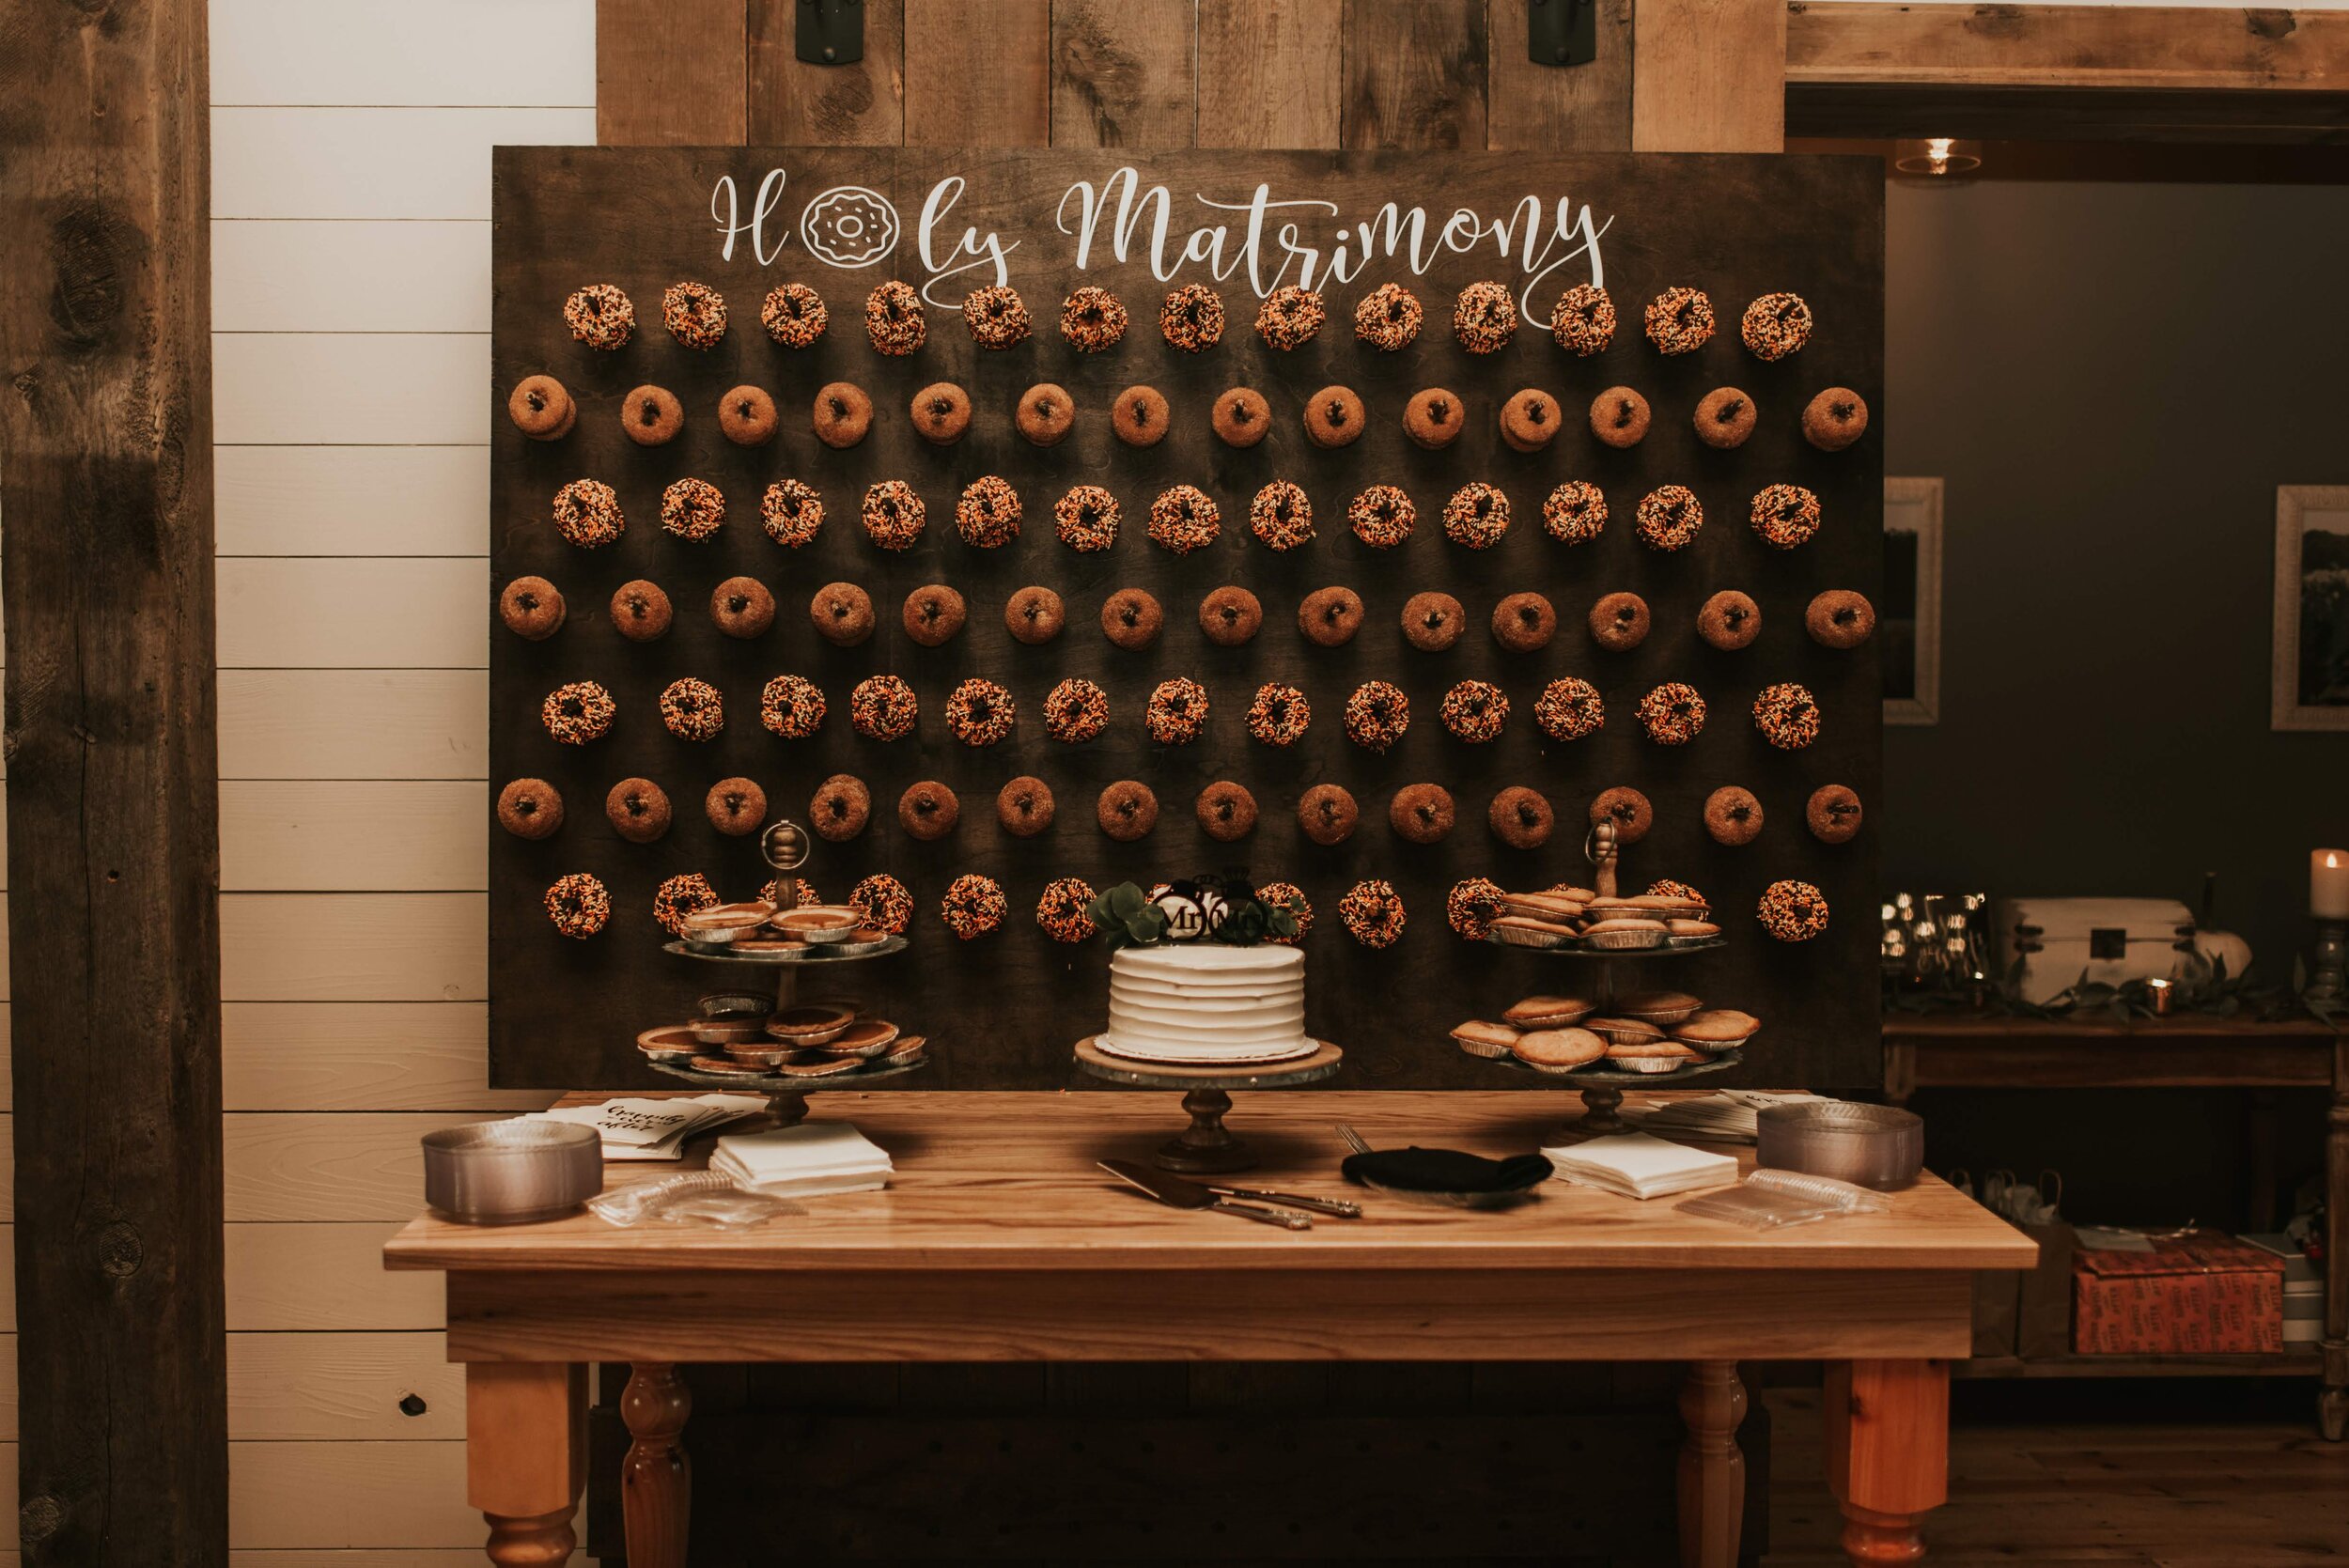 You give us a donut wall and we will make it a work of art!